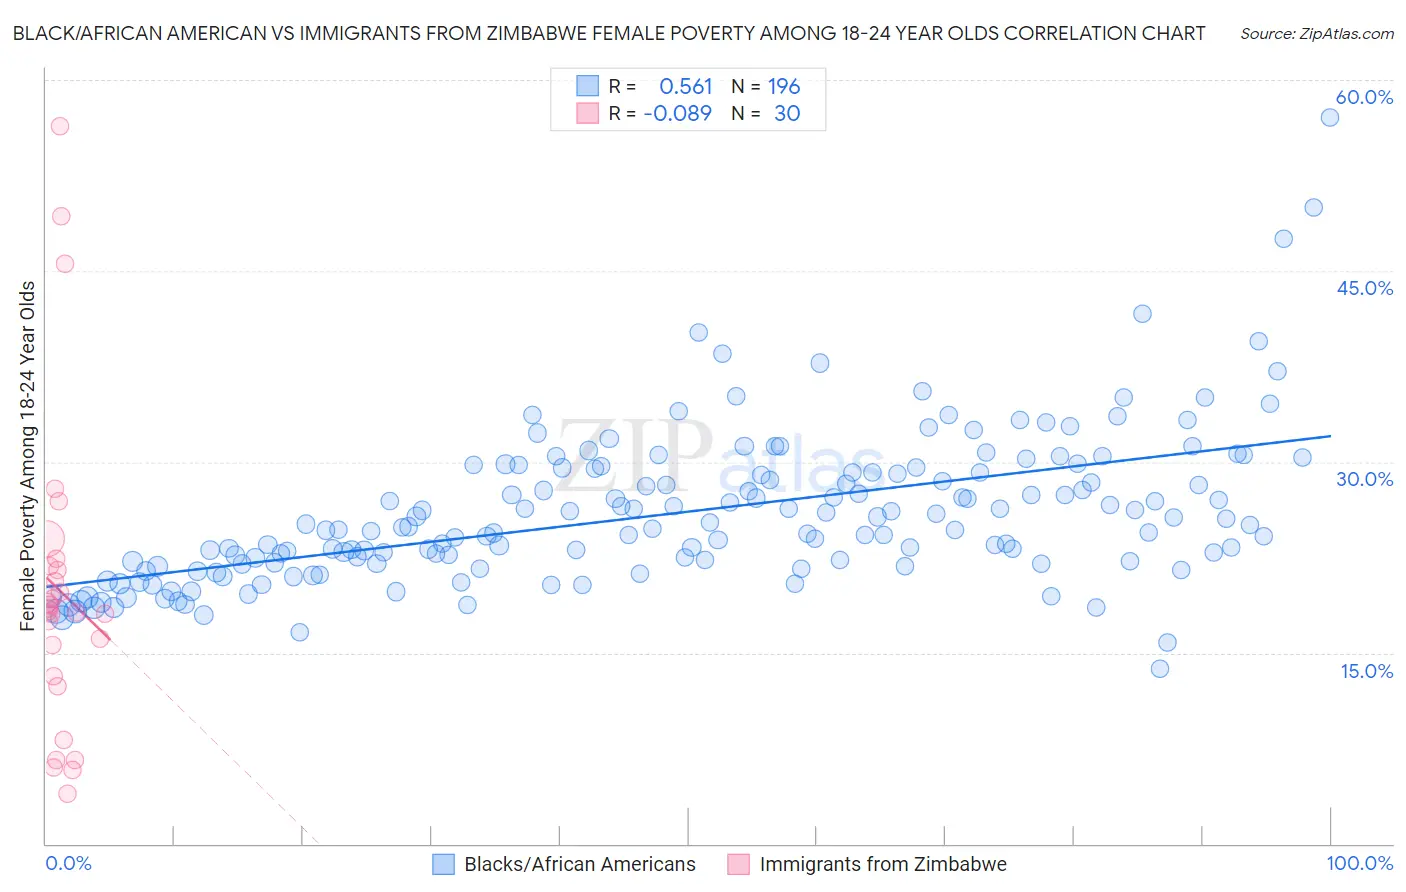 Black/African American vs Immigrants from Zimbabwe Female Poverty Among 18-24 Year Olds